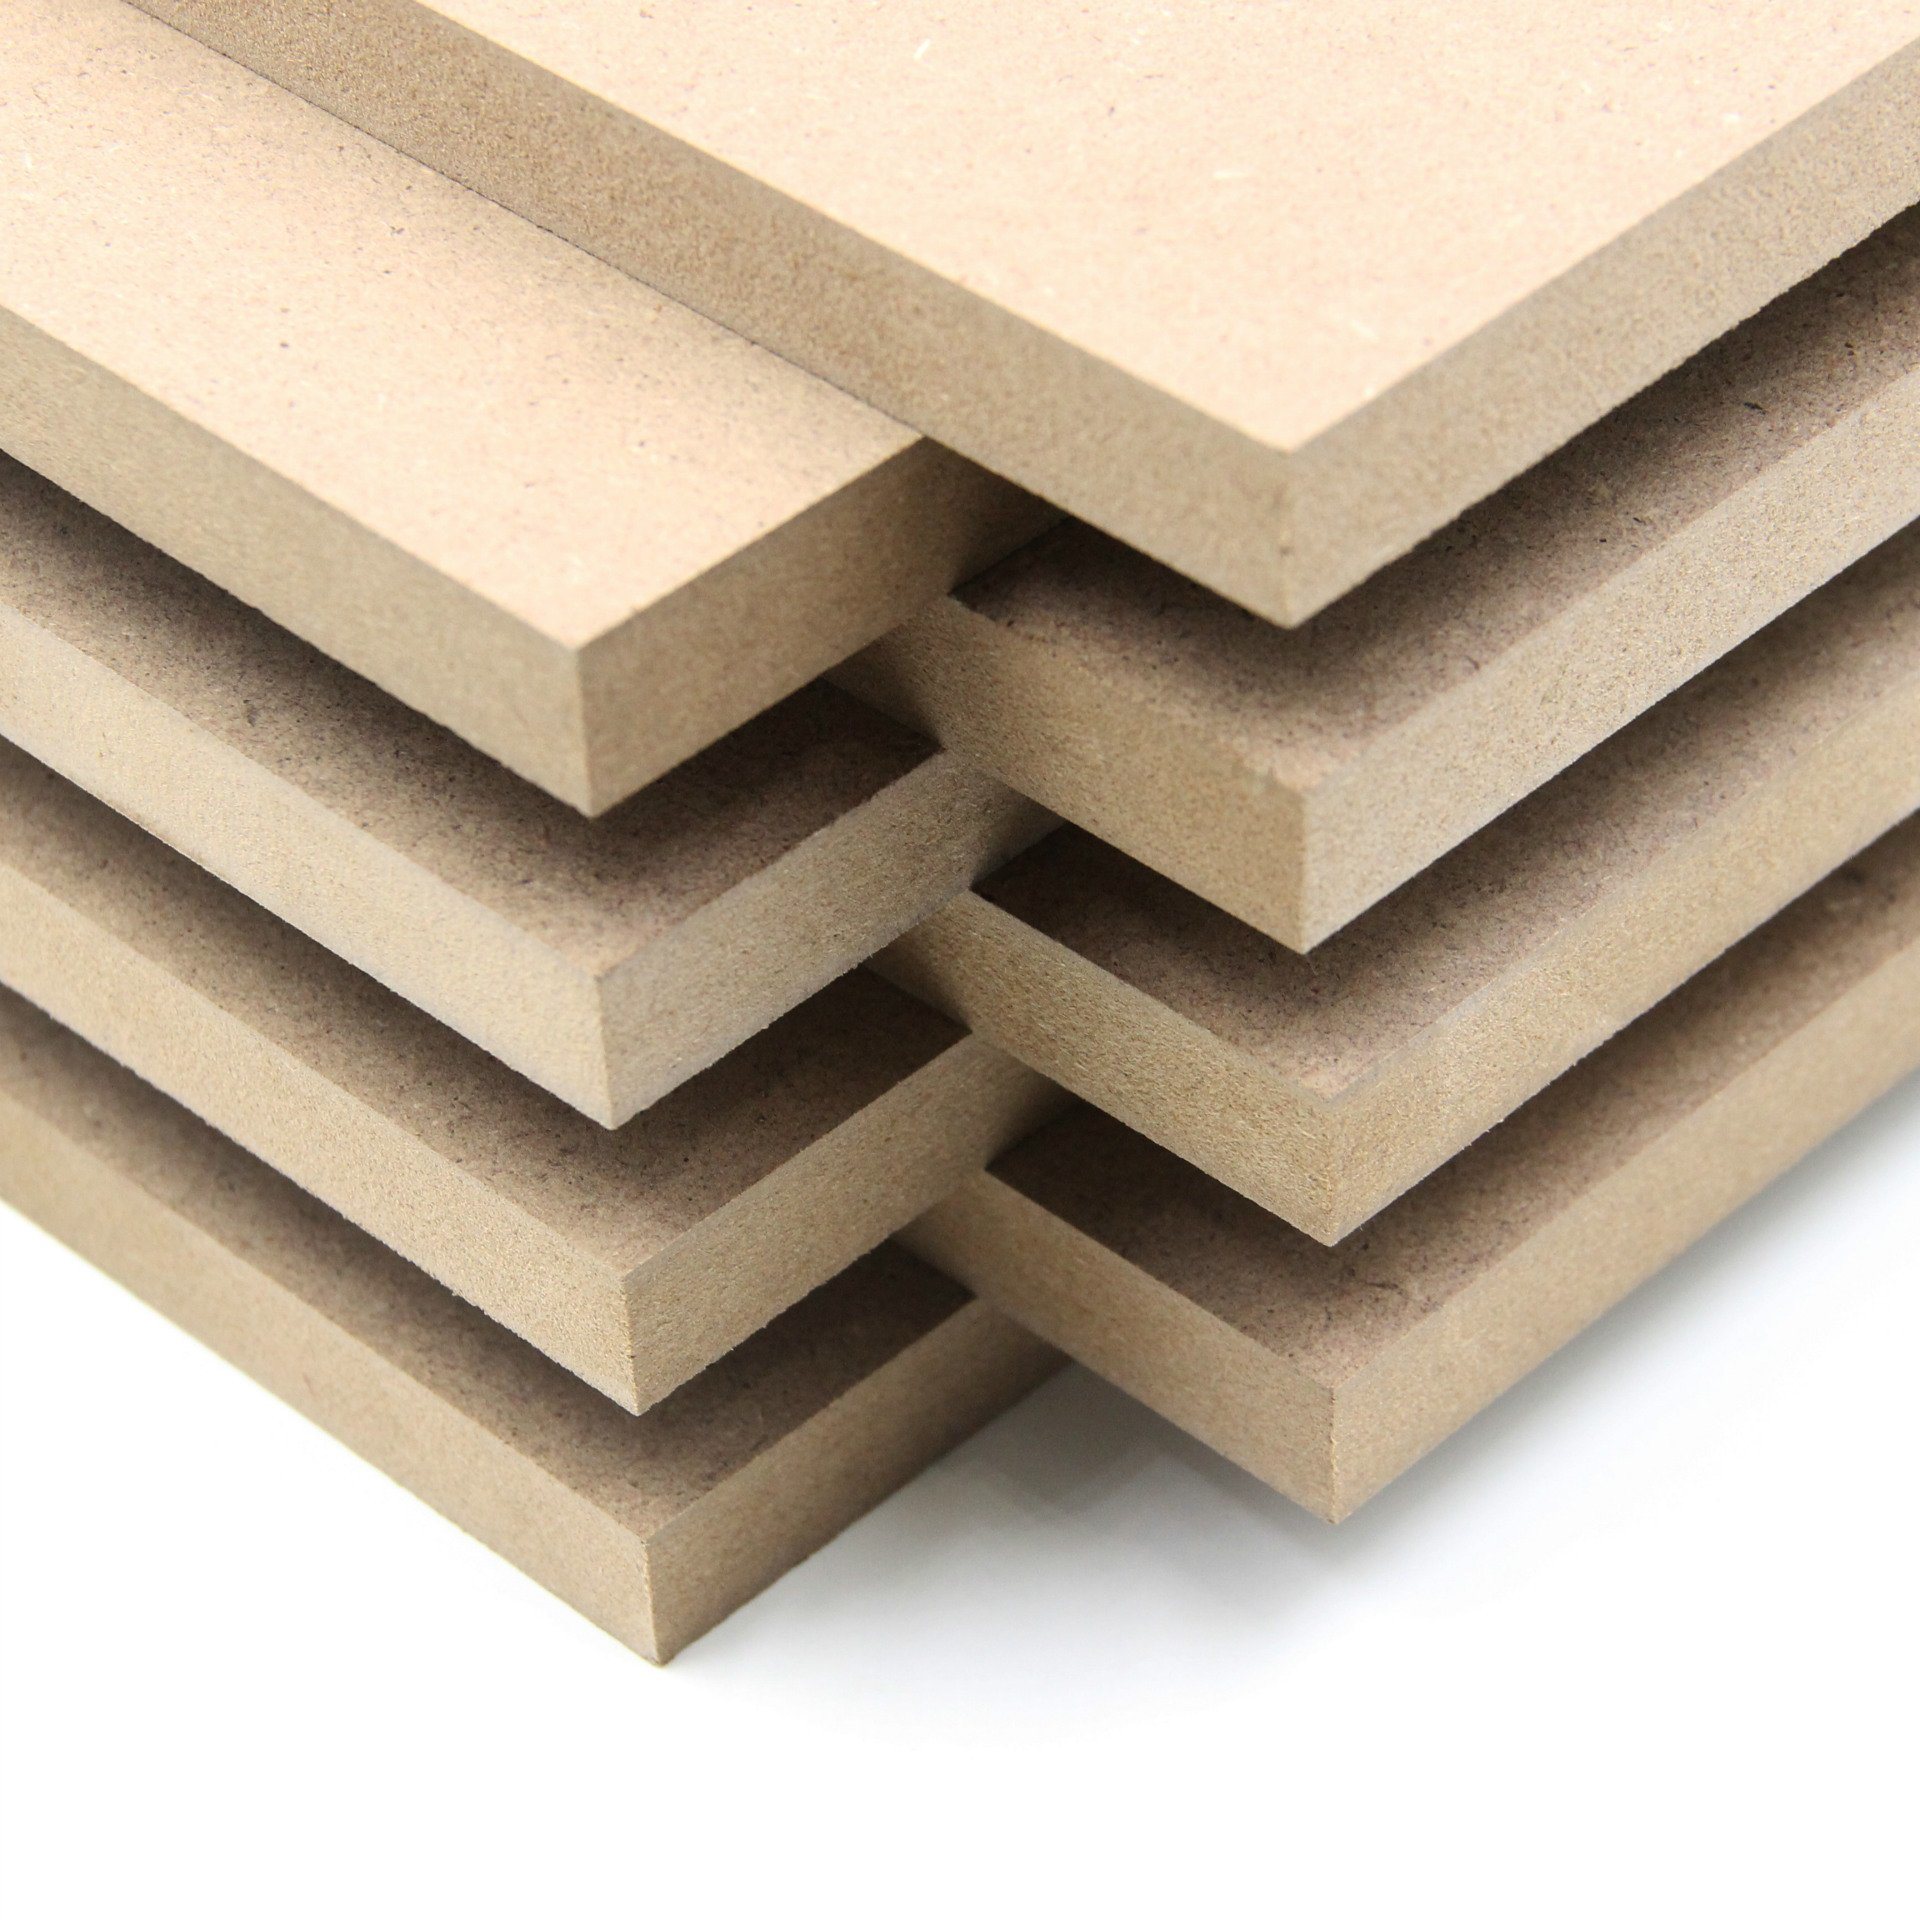 18mm 4X8 MDF with Melamine Film Sheet Melamine Laminated MDF Board for Furniture and Kitchen Cabinet